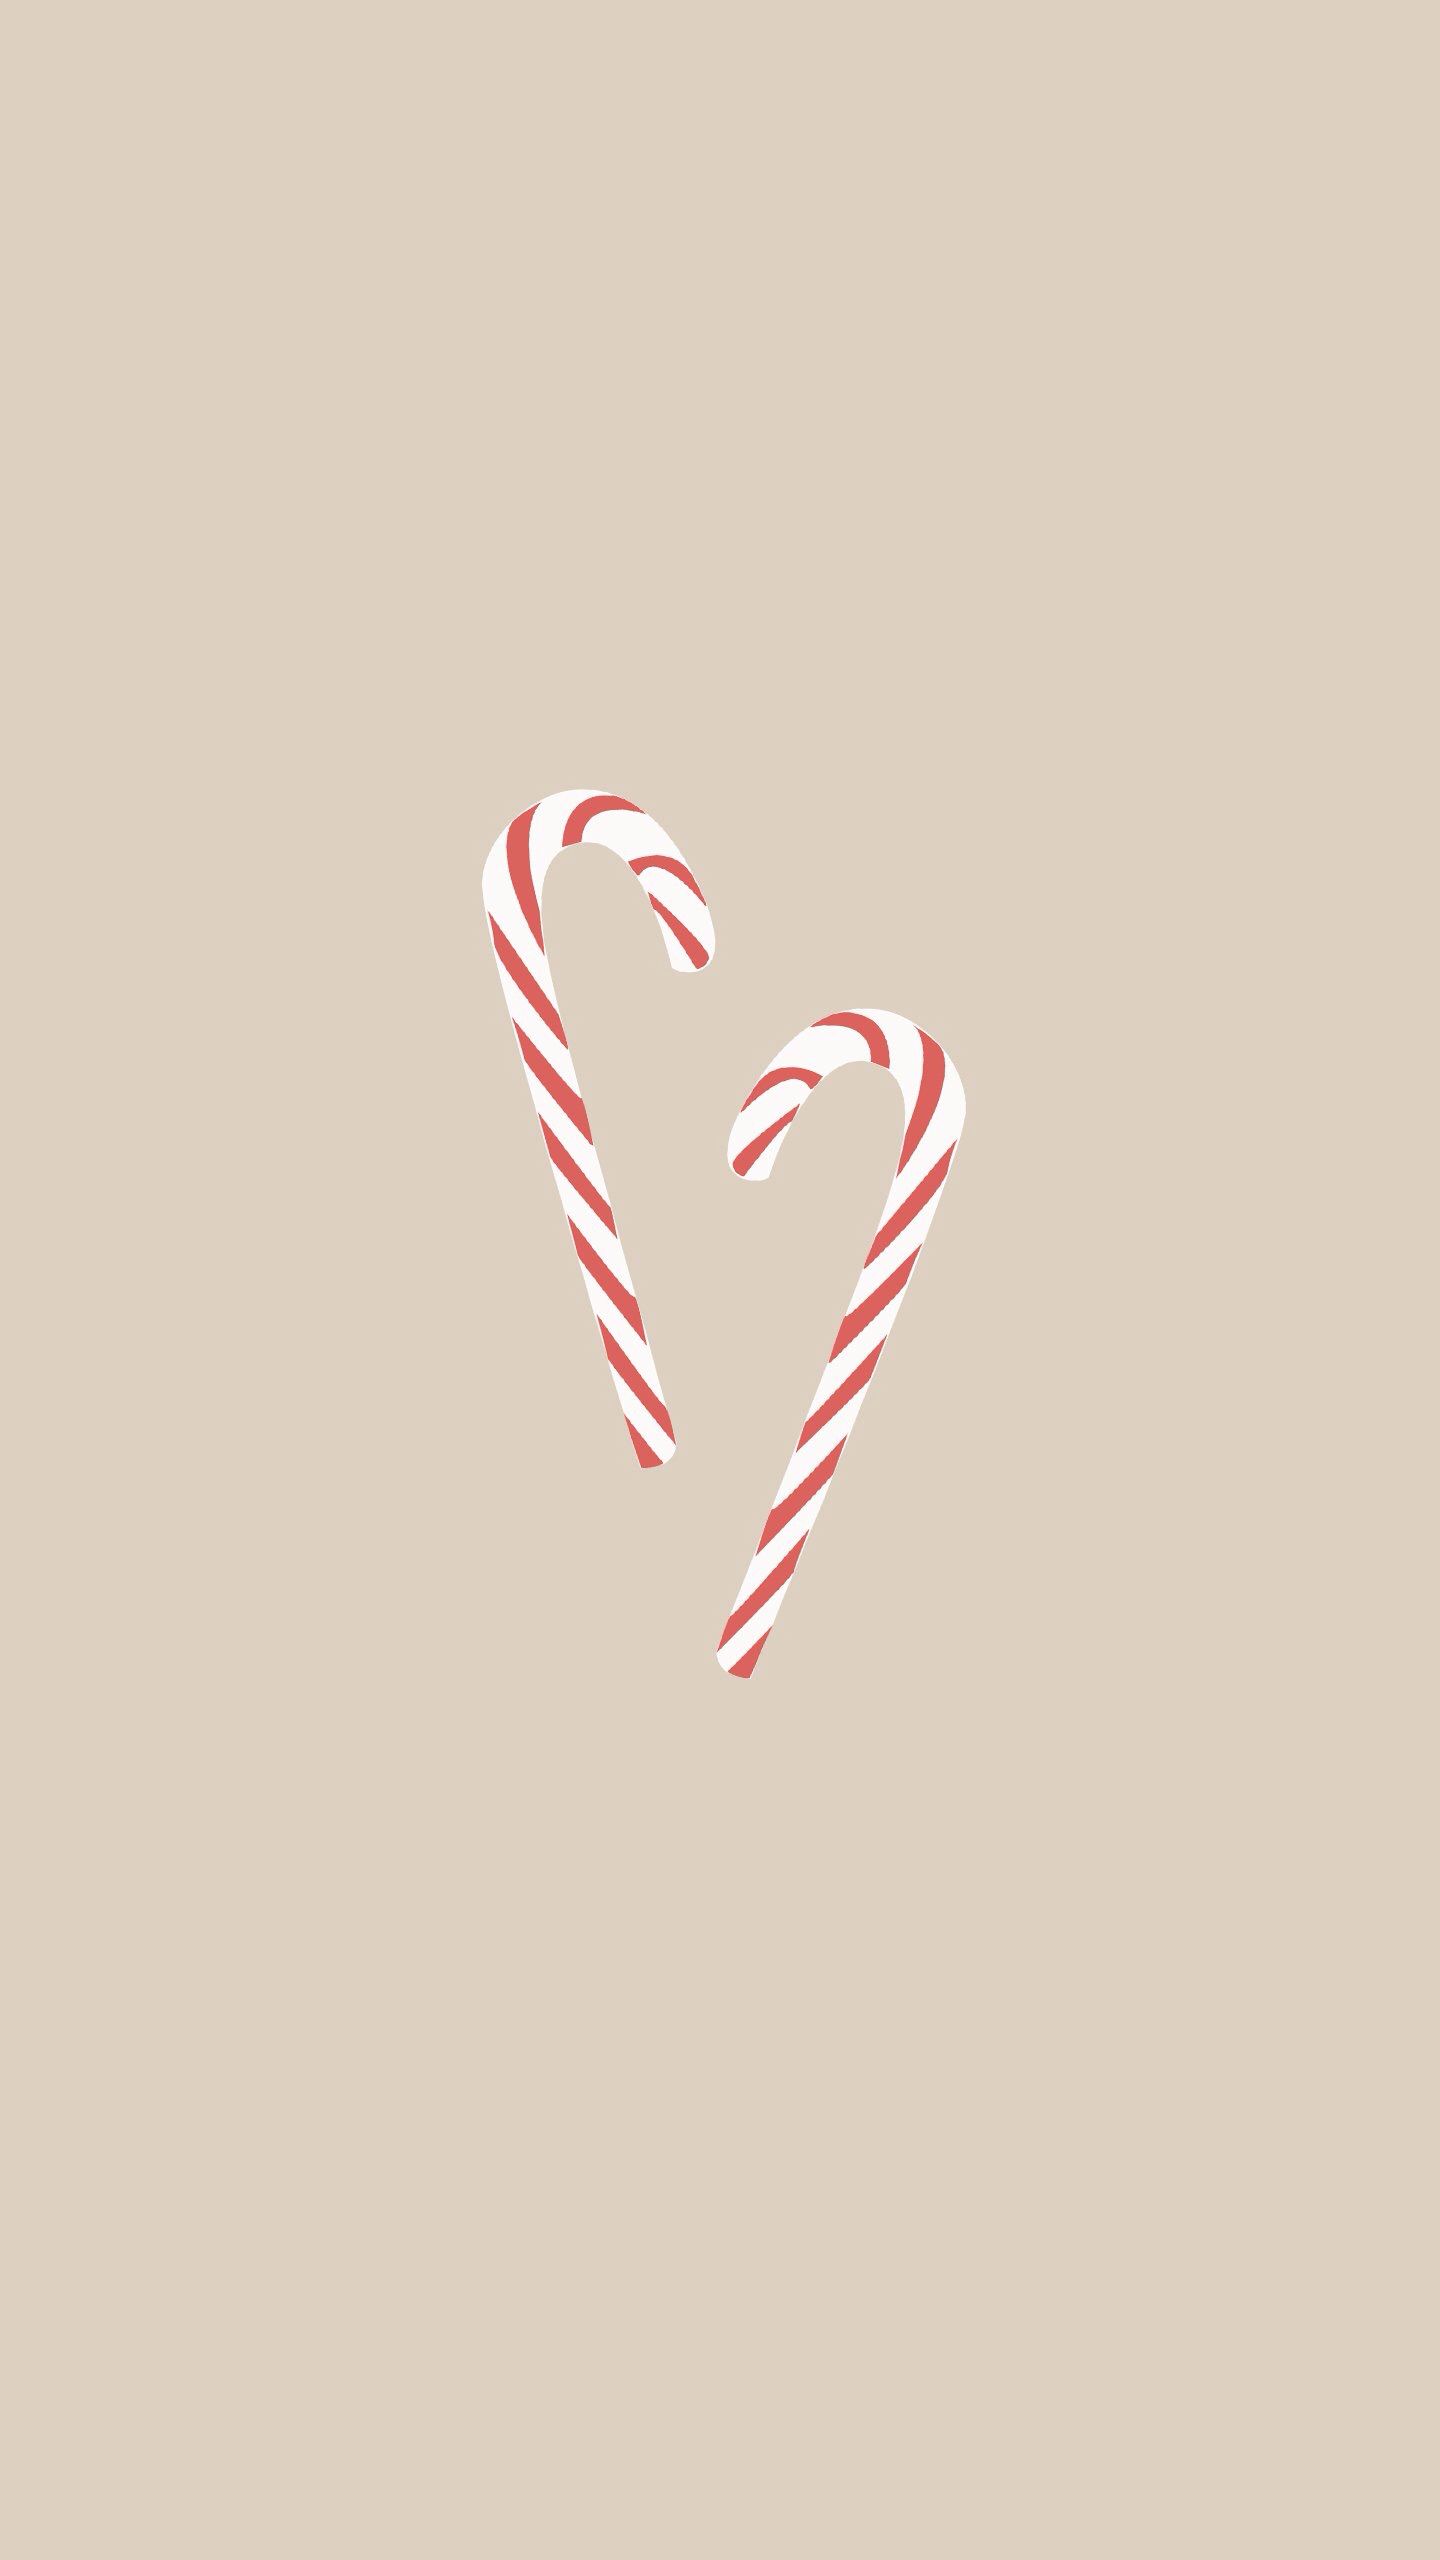 A candy cane heart on beige background - Candy cane